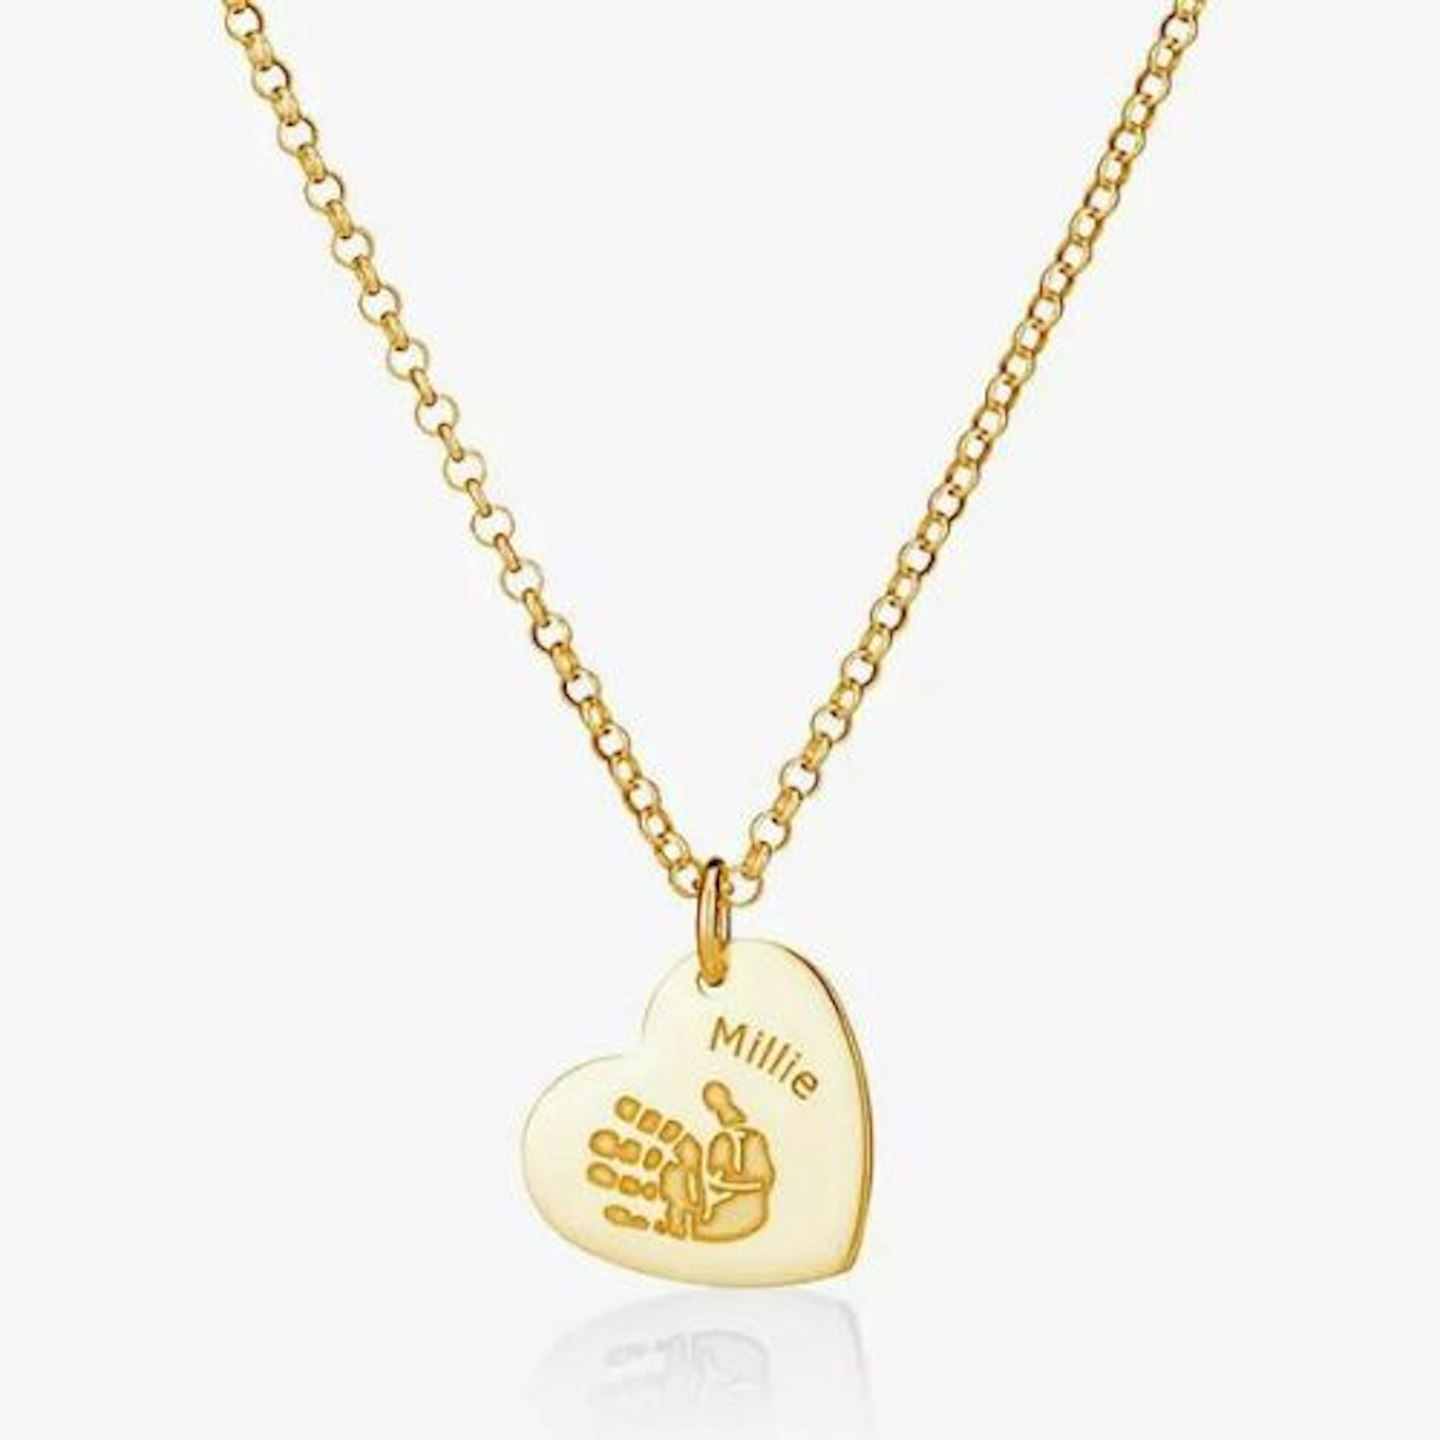 Under The Rose, Personalised Hand Or Foot Print Heart Pendant Necklace